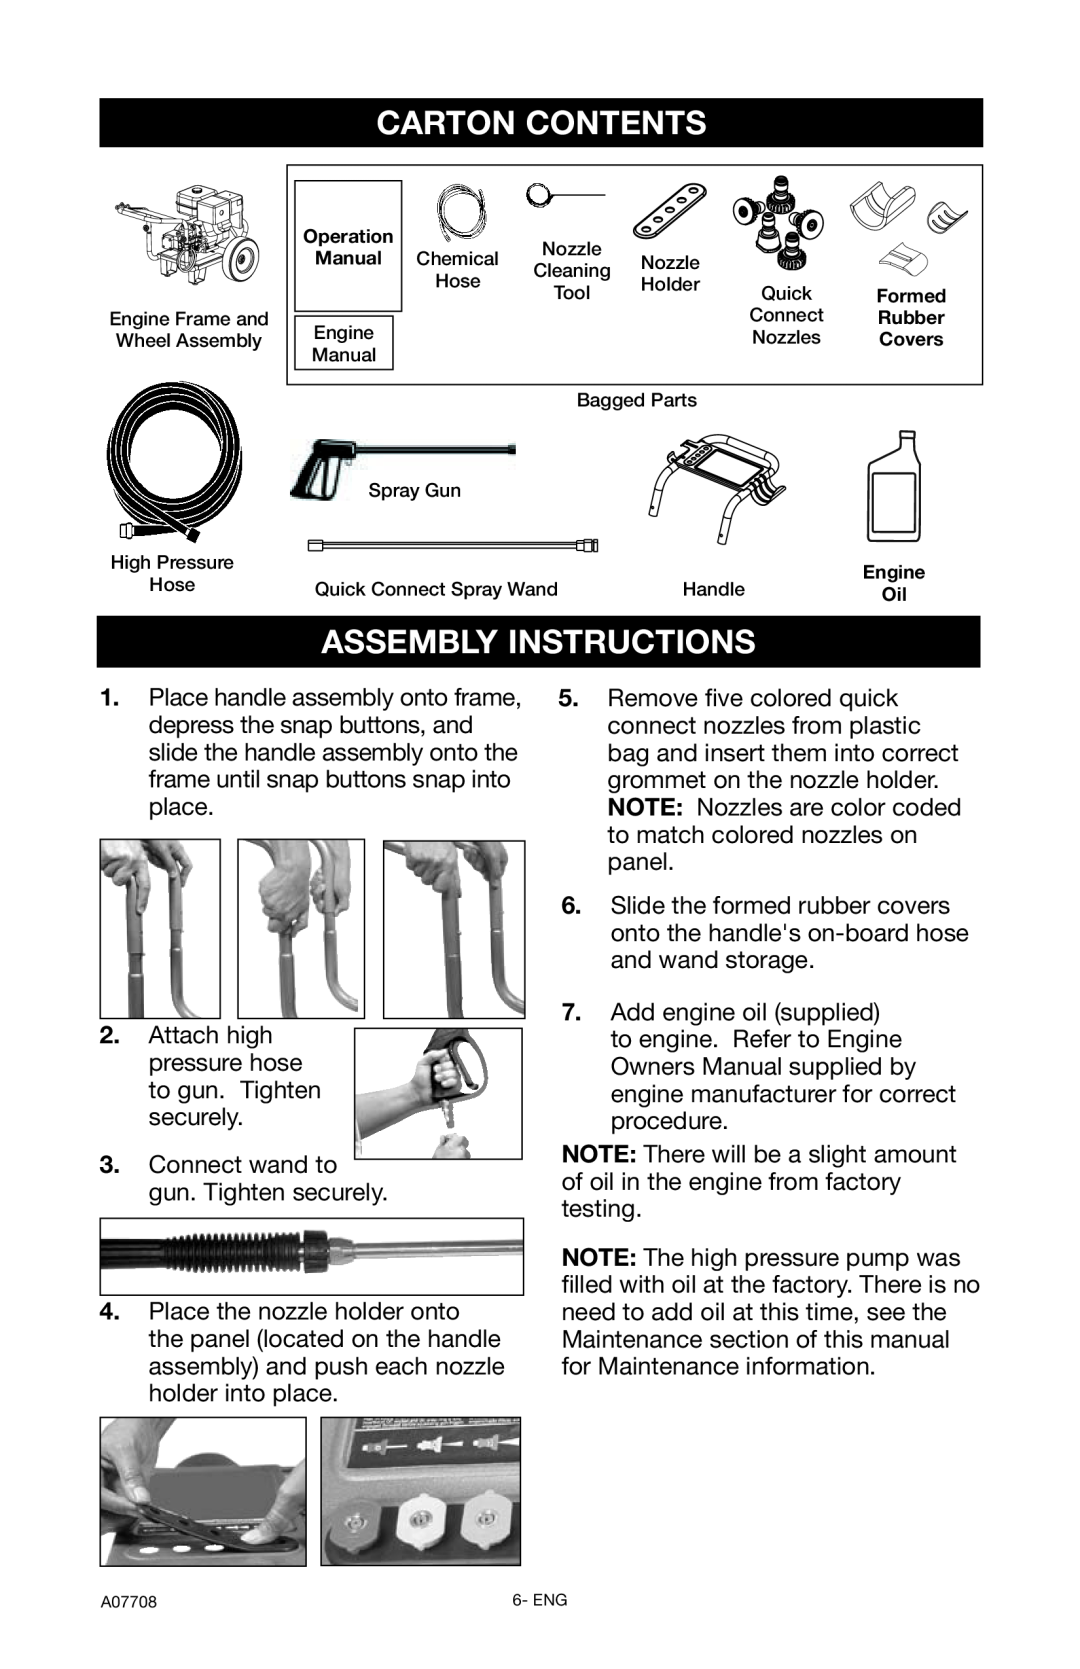 Porter-Cable PCH2800C, A07708-0412-0 instruction manual Carton Contents, Assembly Instructions 